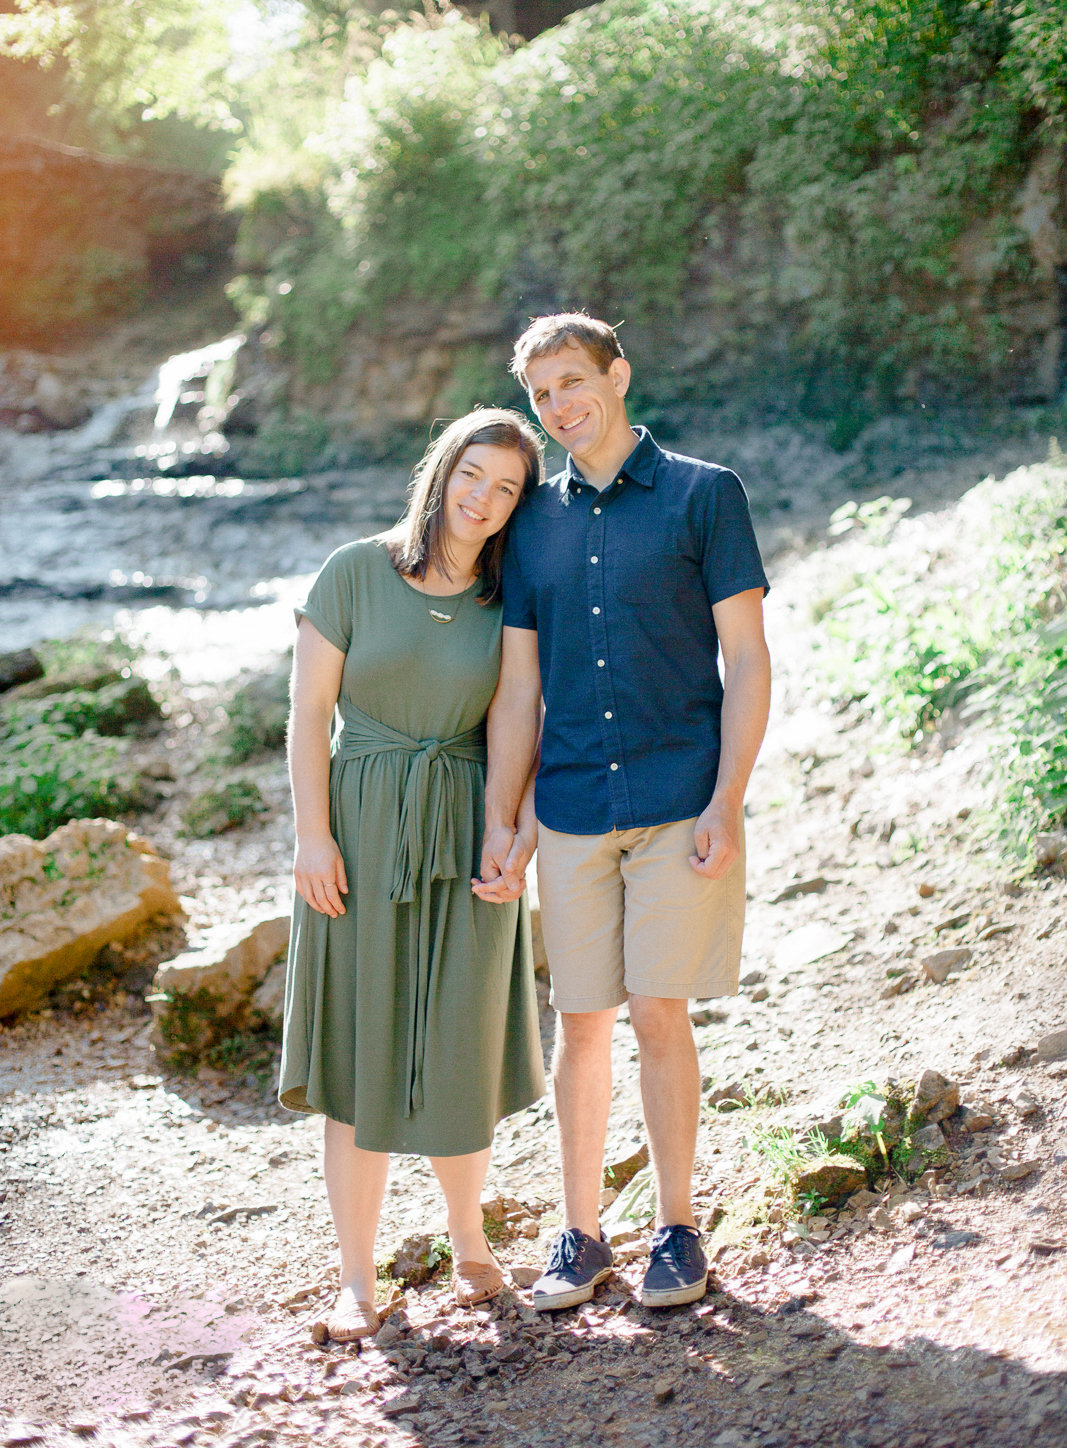 willow river state park waterfall background as couple stands hand in hand